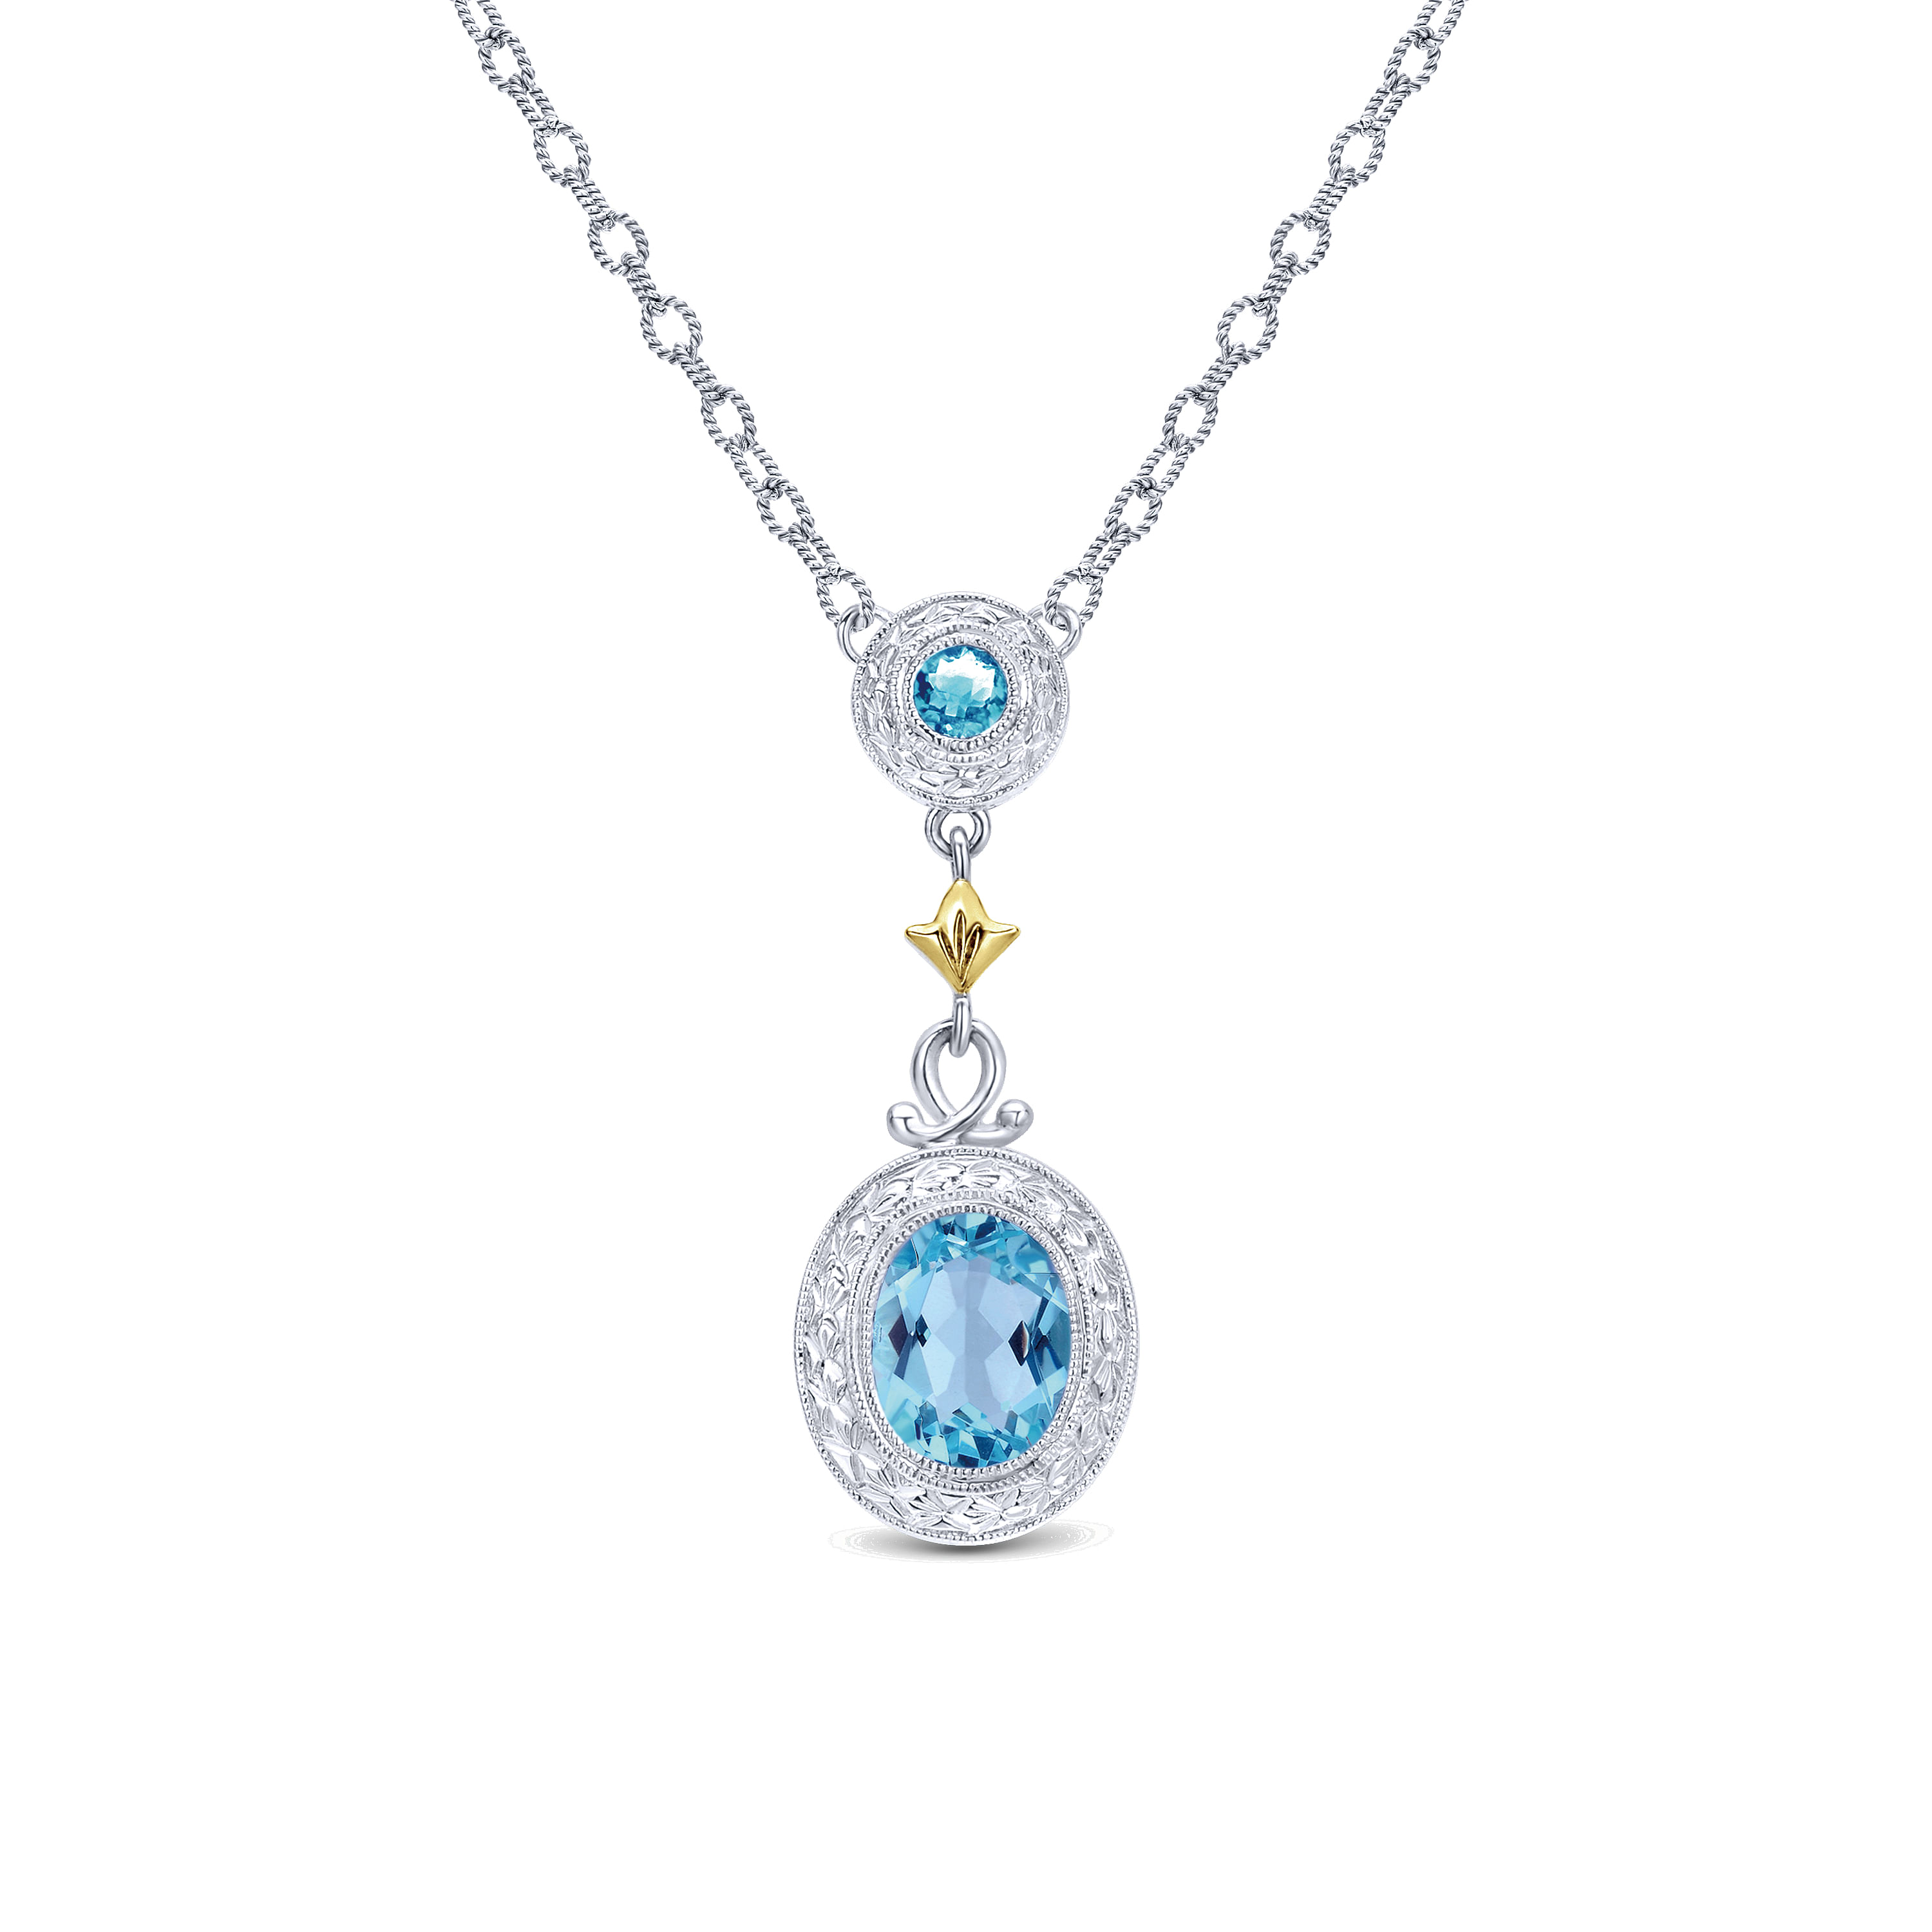 18 inch 925 Sterling Silver/18k Yellow Gold Vintage Inspired Swiss Blue Topaz Necklace